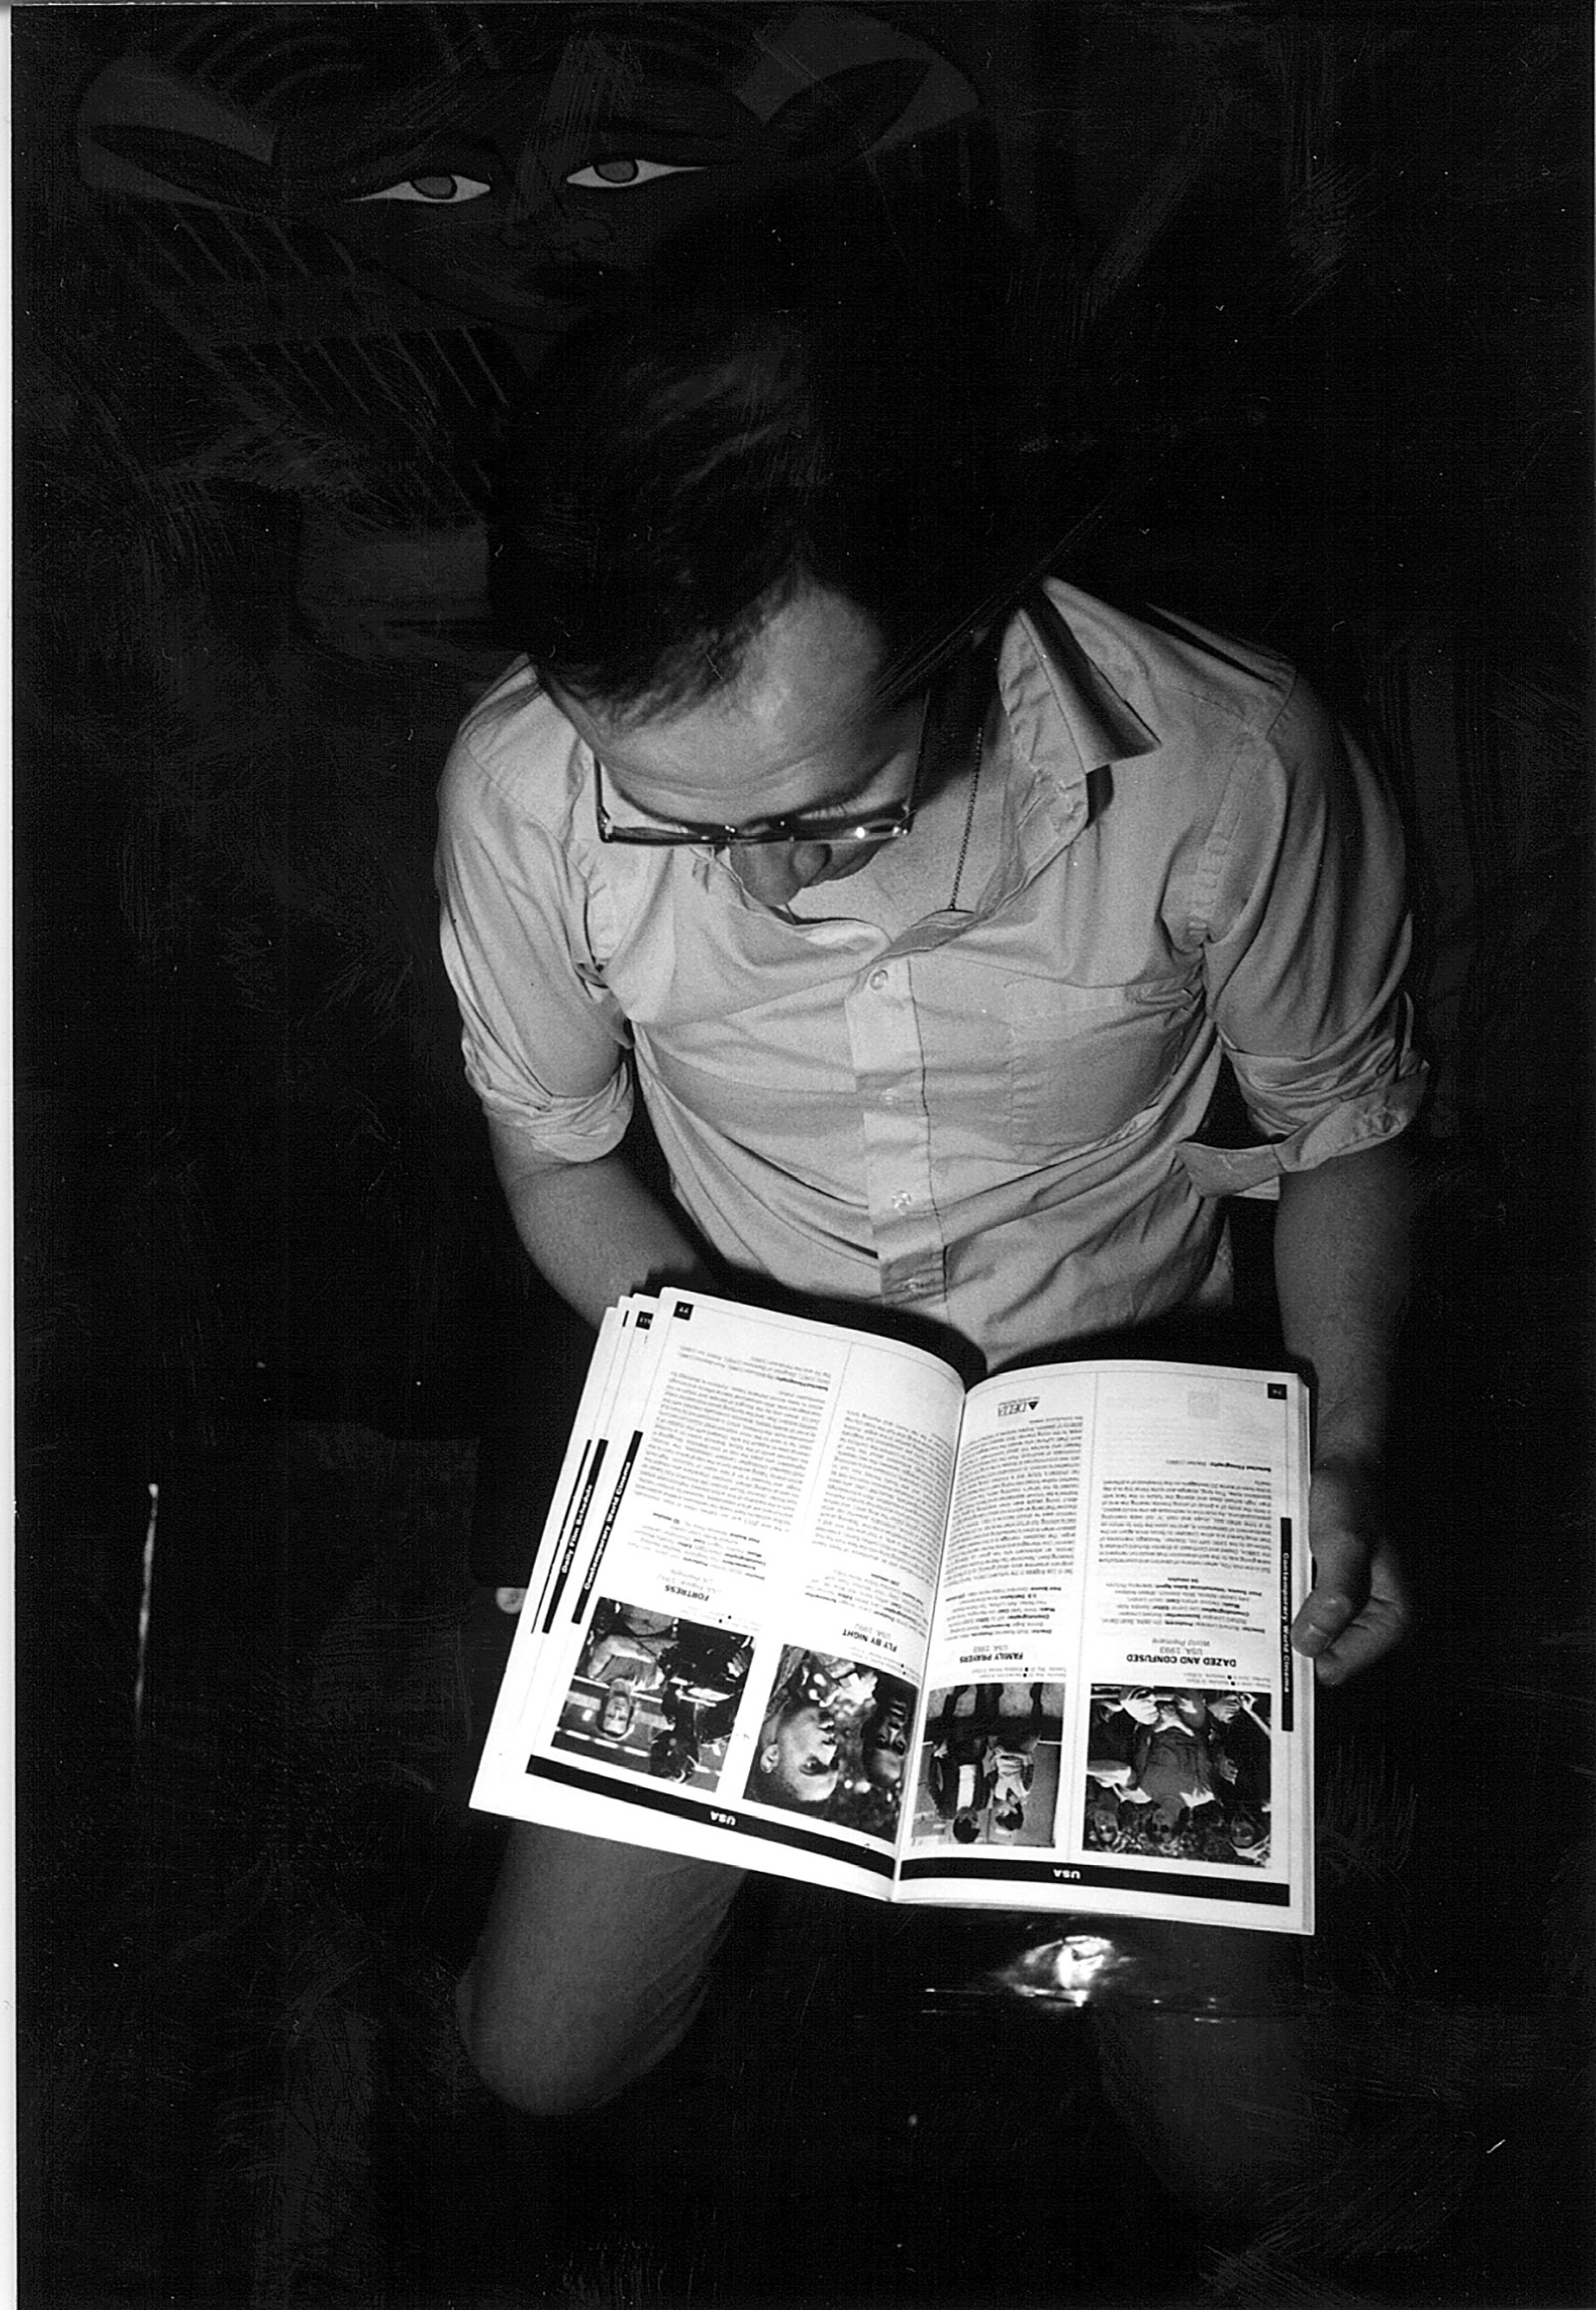 SIFFer planning his film schedule, currently open to page 76-77 in the program, a spread that included the World Premiere of Dazed and Confused